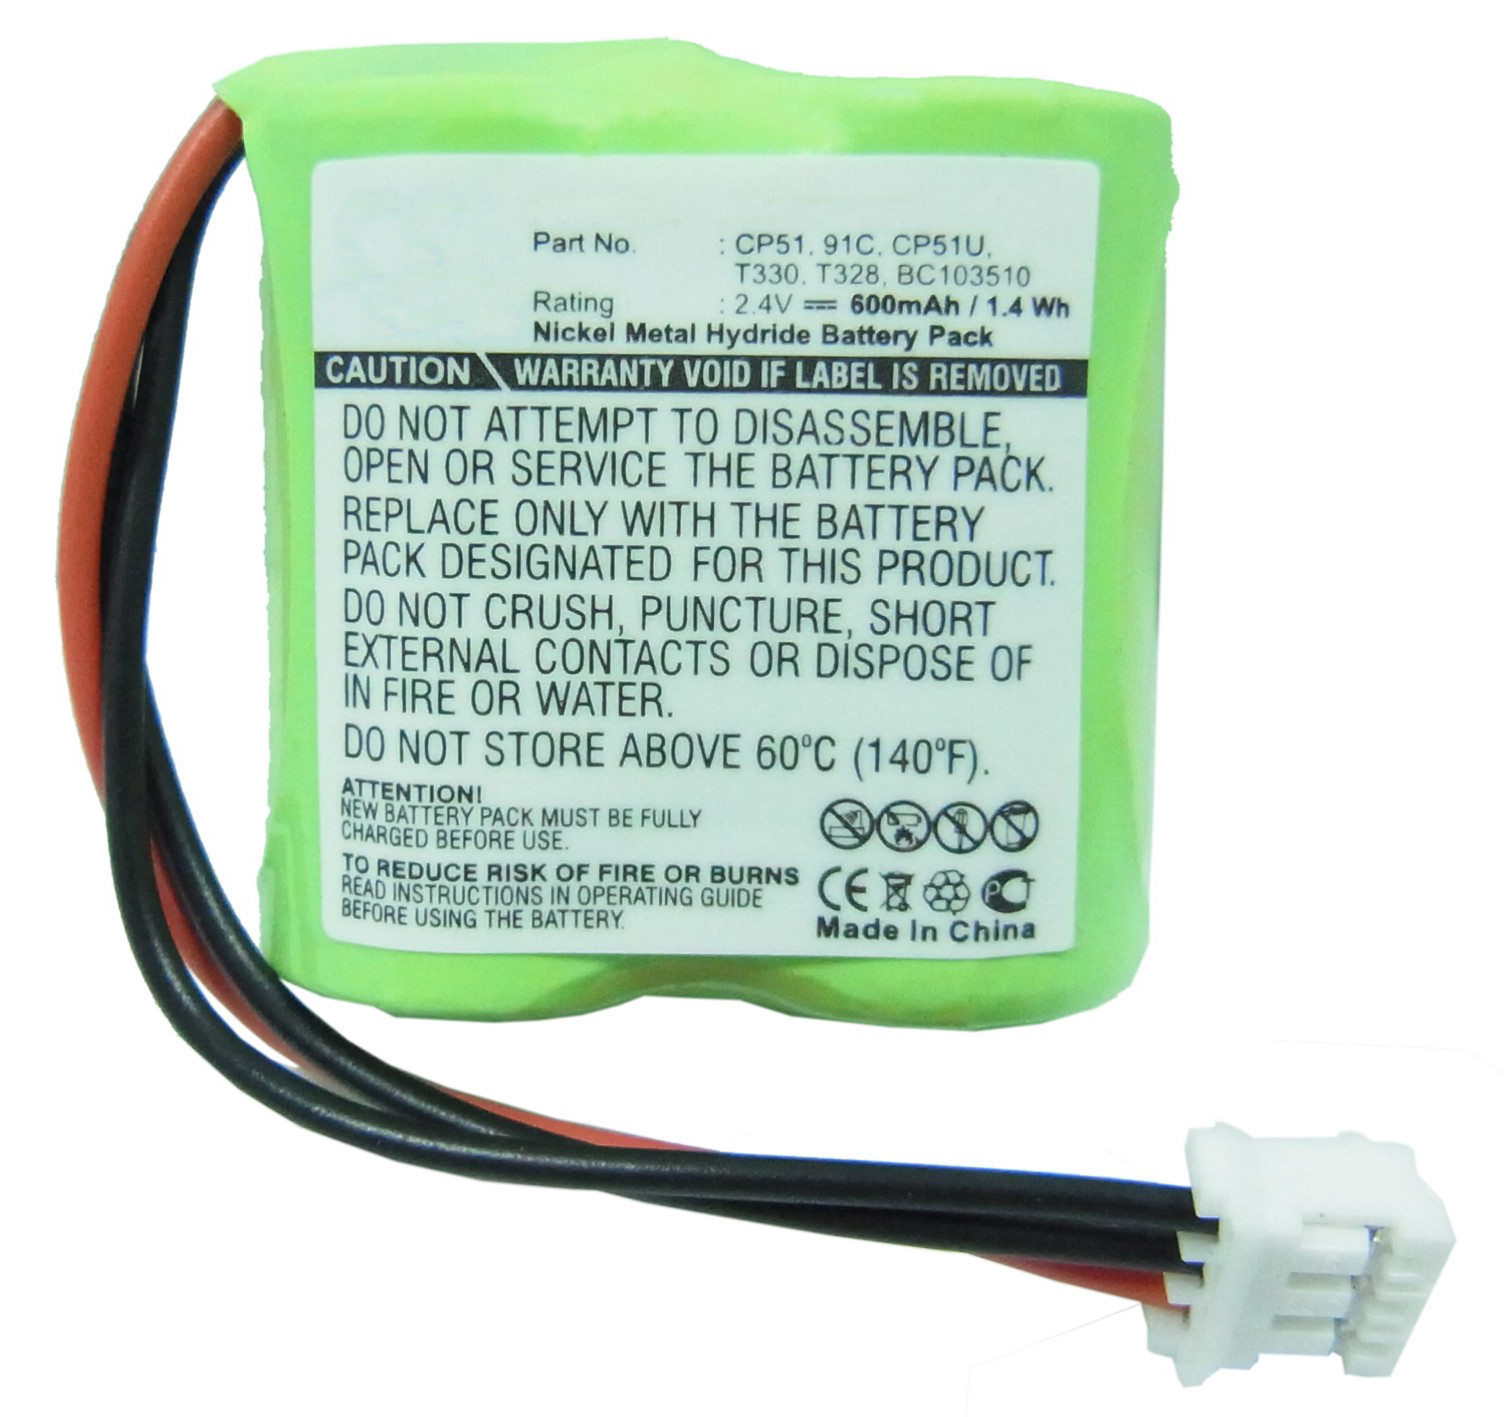 Synergy Digital Battery Compatible With GP 91C Cordless Phone Battery - (Ni-MH, 2.4V, 600 mAh)